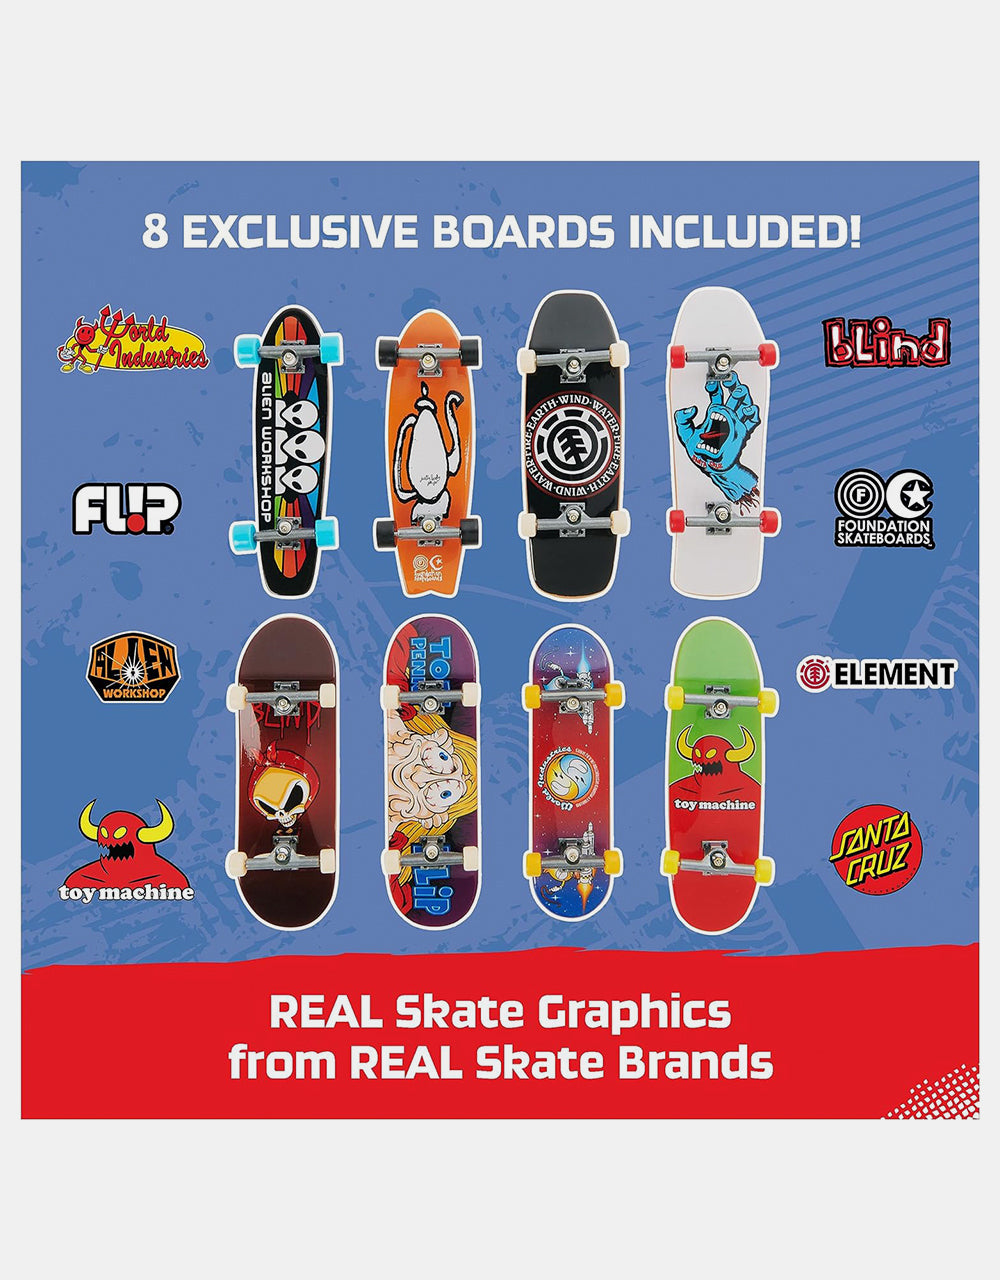 Tech Deck 25th Anniversary Fingerboards 8-Pack